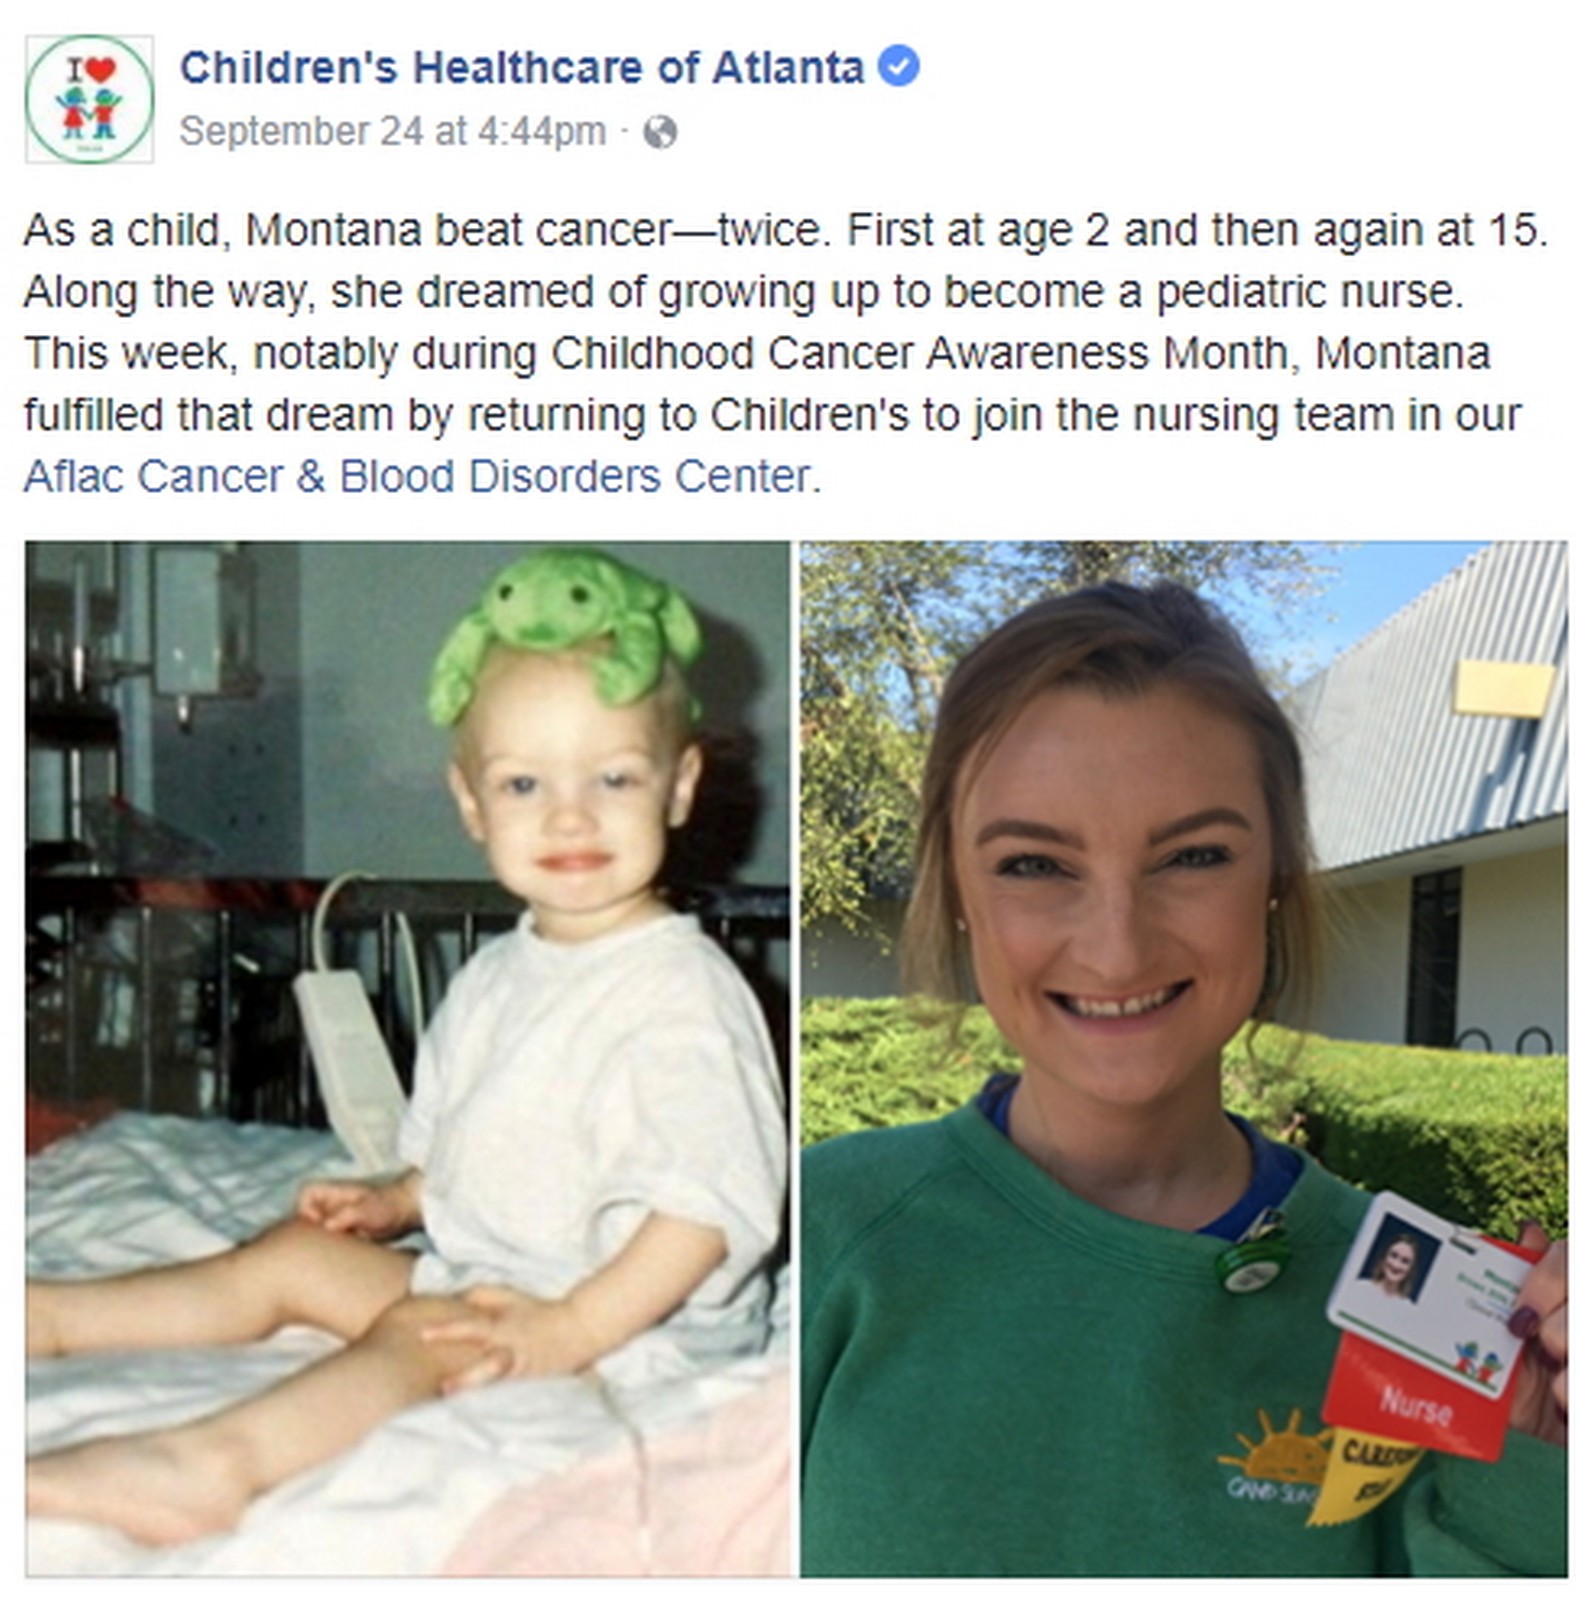 She battled cancer again at 15 years old and beat it a second time. At 24, she is now realizing her dreams of being a nurse.